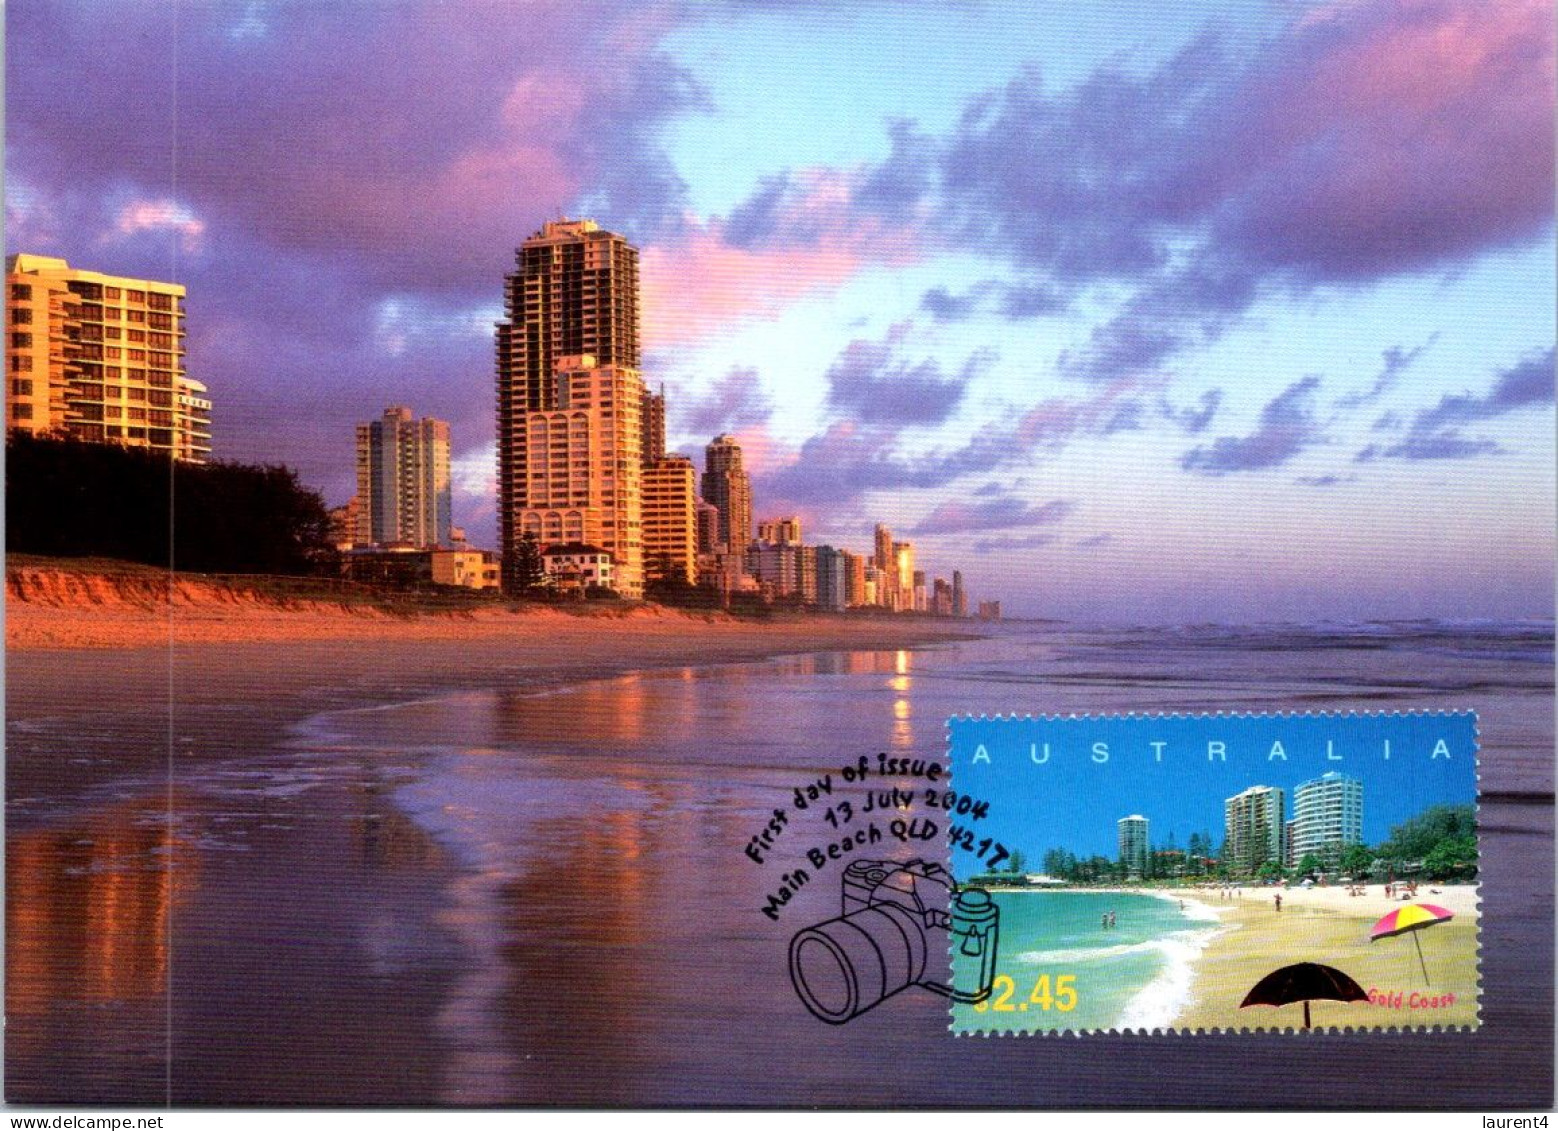 10-5-2024 (4 Z 38) Australia (1 Card) Maxicard (if Not Sold Will NOT Be Re-listed) Gold Coast - Cartes-Maximum (CM)